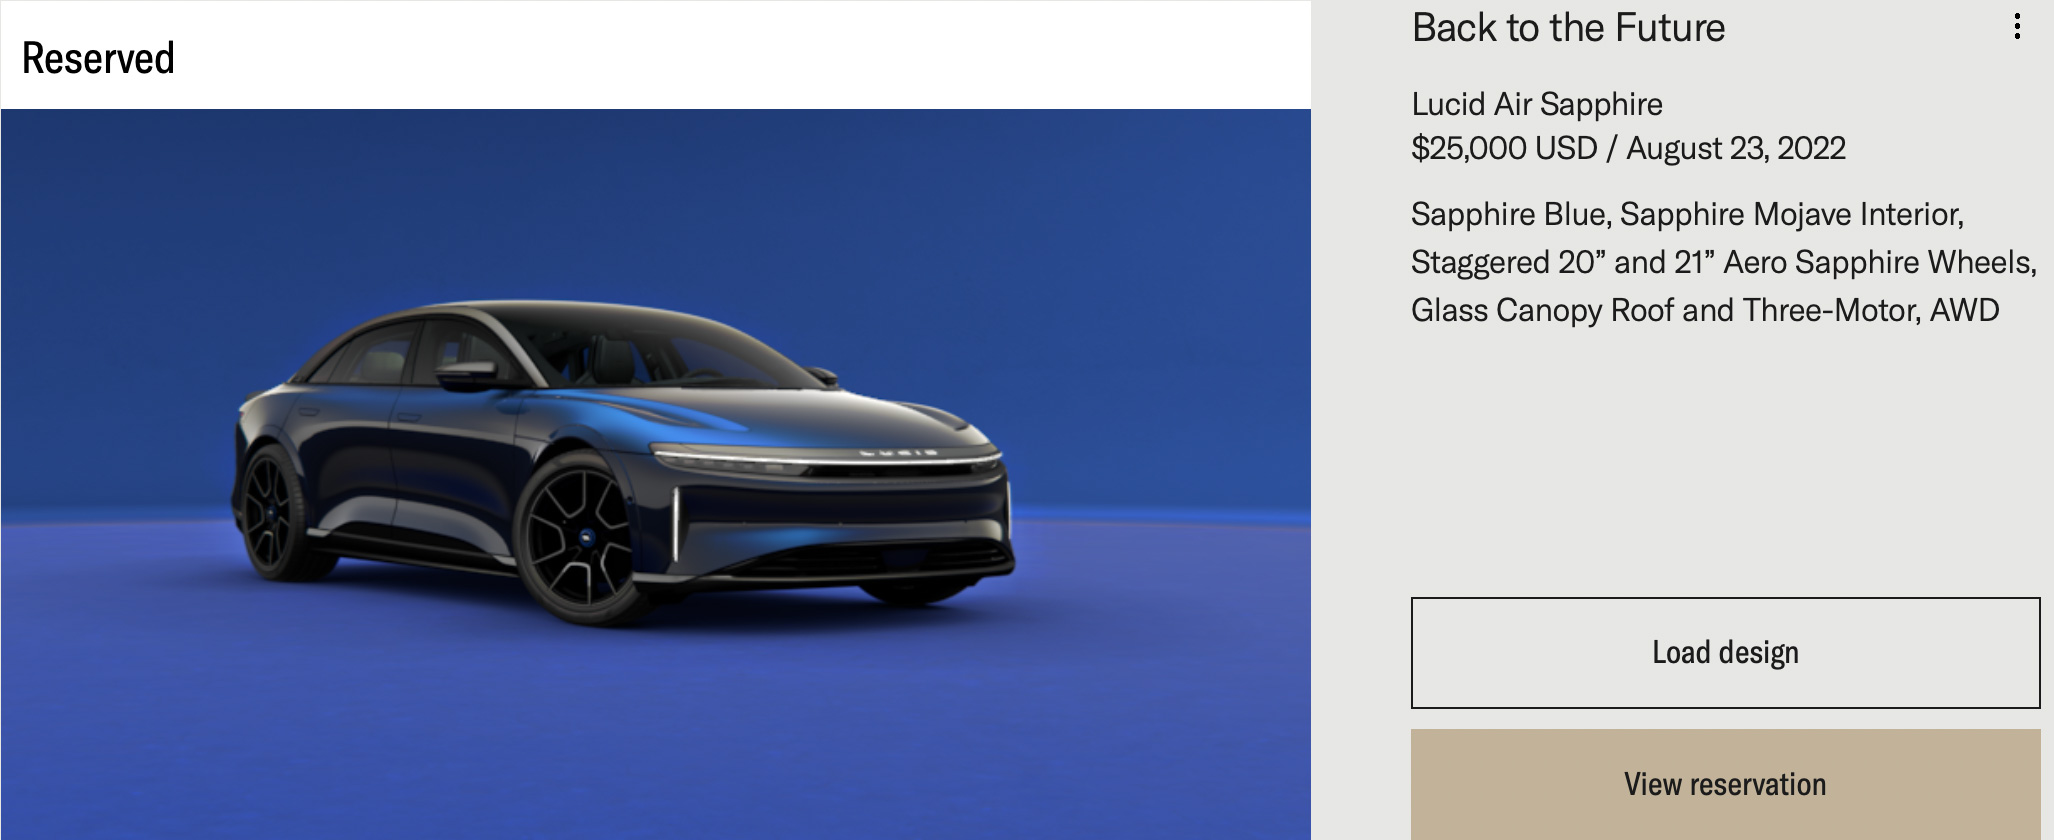 A Couple Of People Already Reserved The Lucid Air Sapphire - Lucid Insider  Blog - Lucid Air & Lucid Motors News